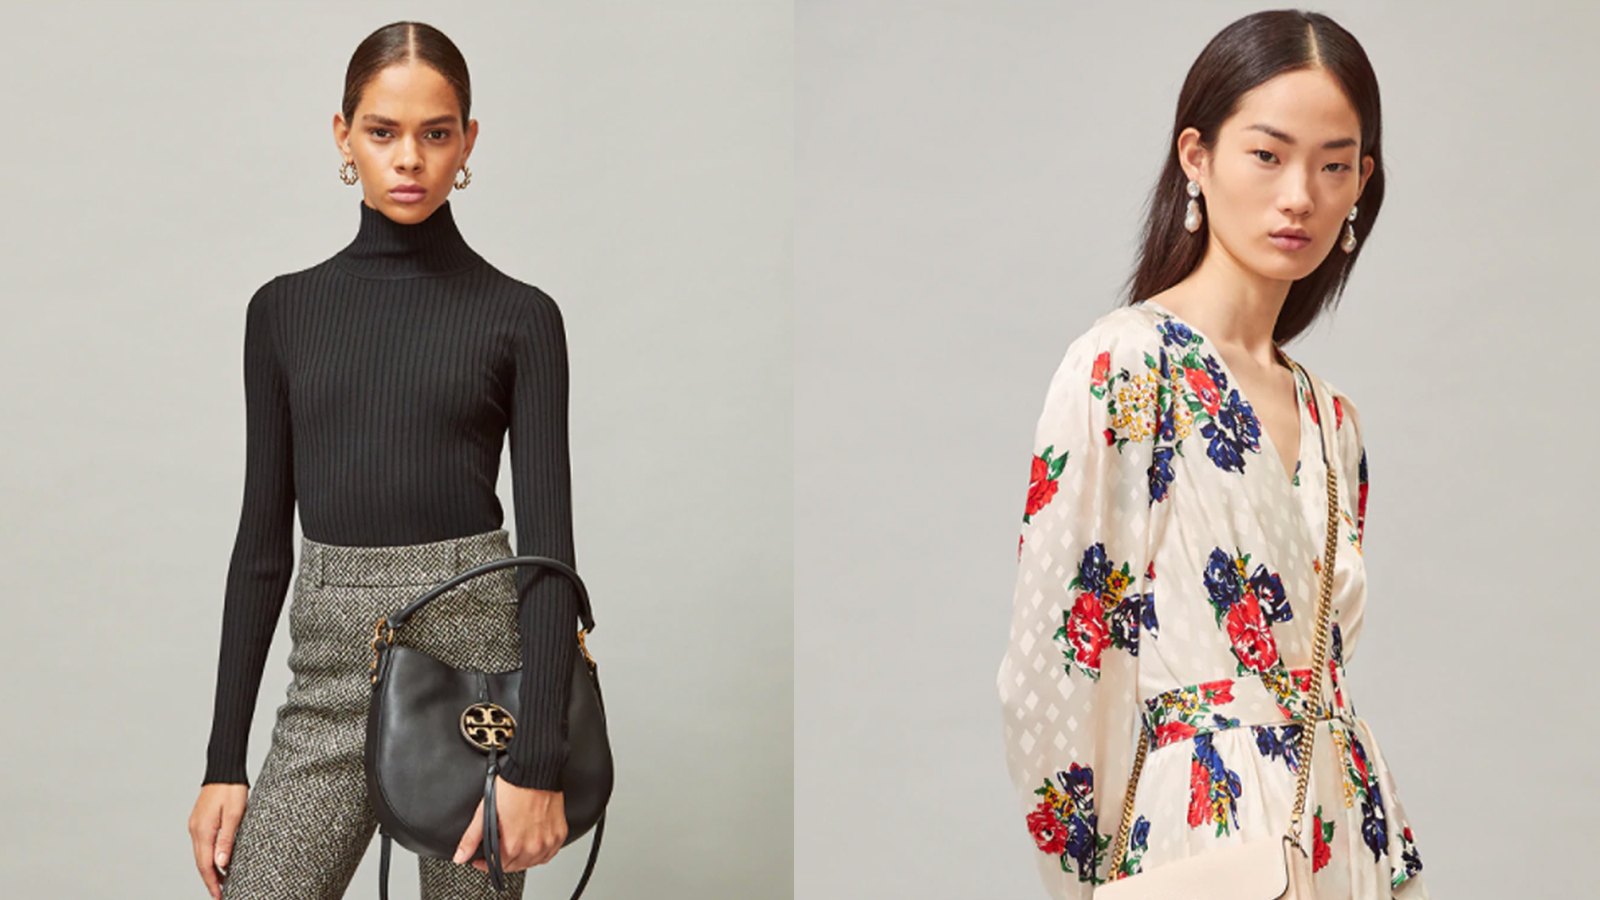 Tory Burch Is Having a Major Sale and You Can Score Up to 70% Off